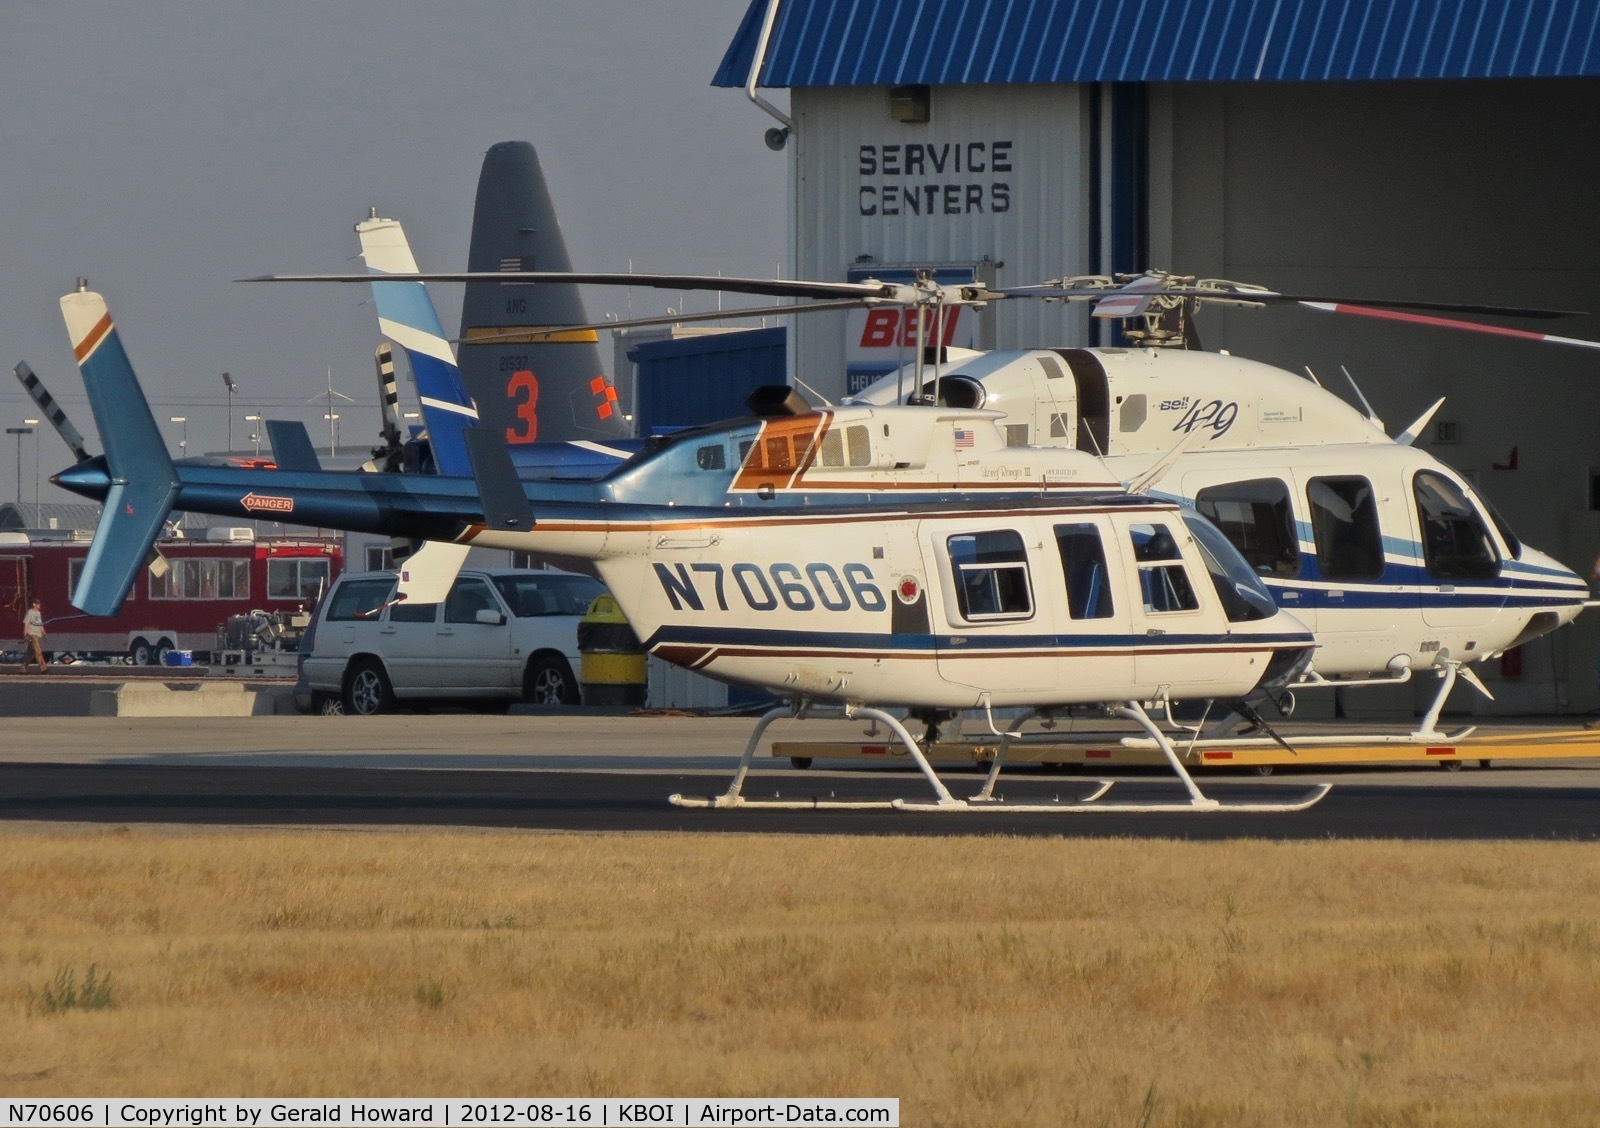 N70606, 1989 Bell 206L-3 LongRanger III C/N 51282, Parked at Idaho helicopters ramp.